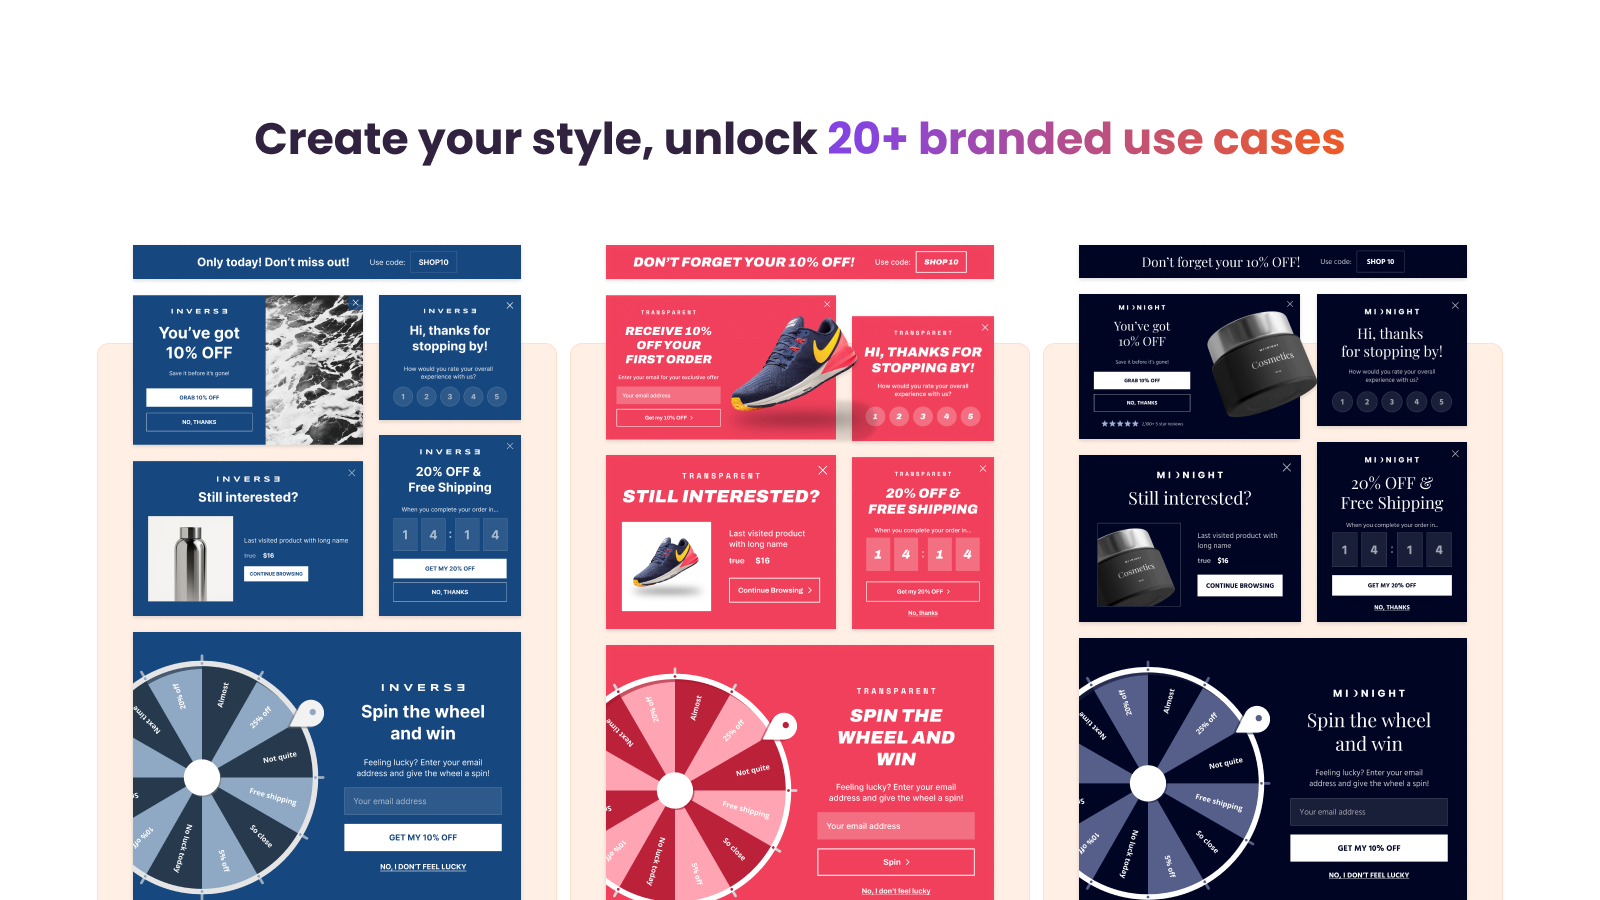 gamification, lucky wheel, product recommendation popups